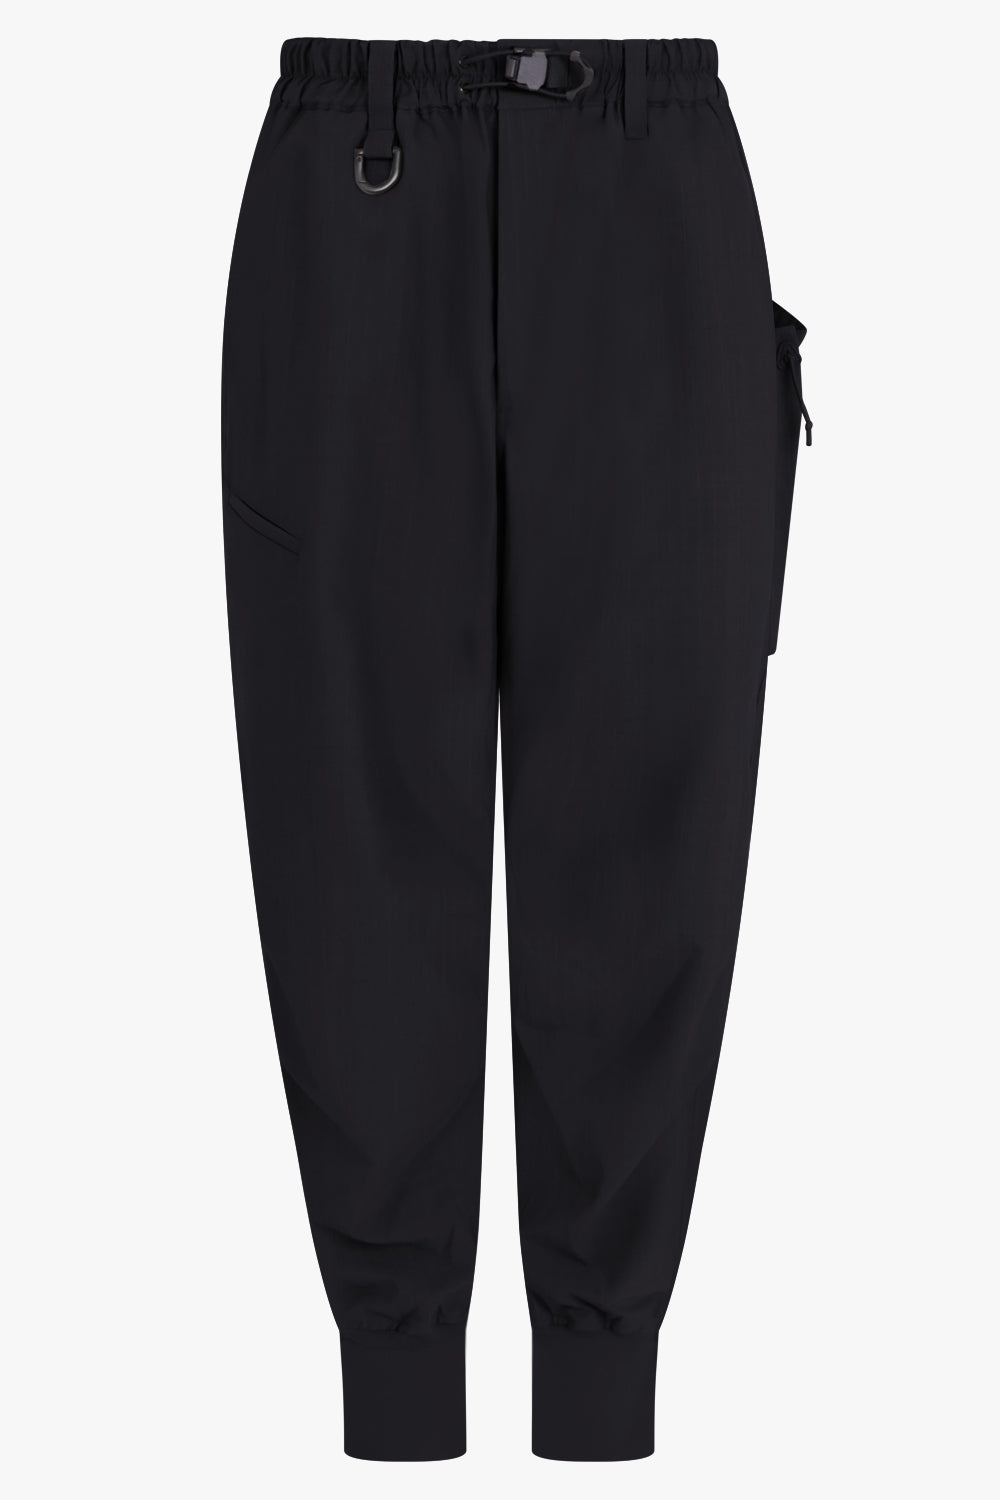 Hosiery And Polyester Male Mens Designer Track Pant